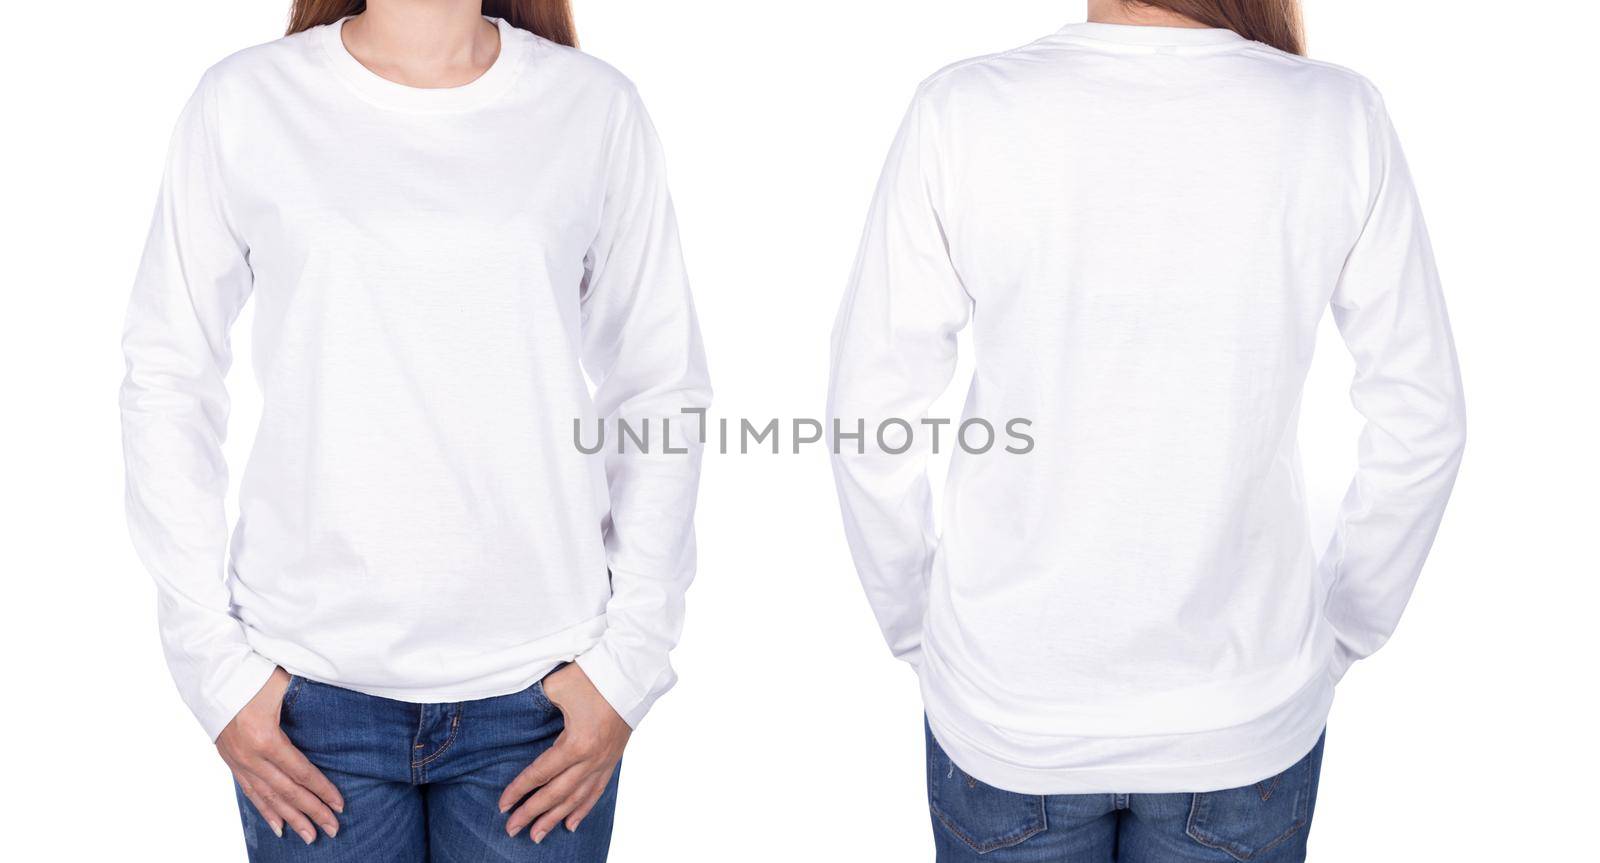 woman in white long sleeve t-shirt isolated on a white background